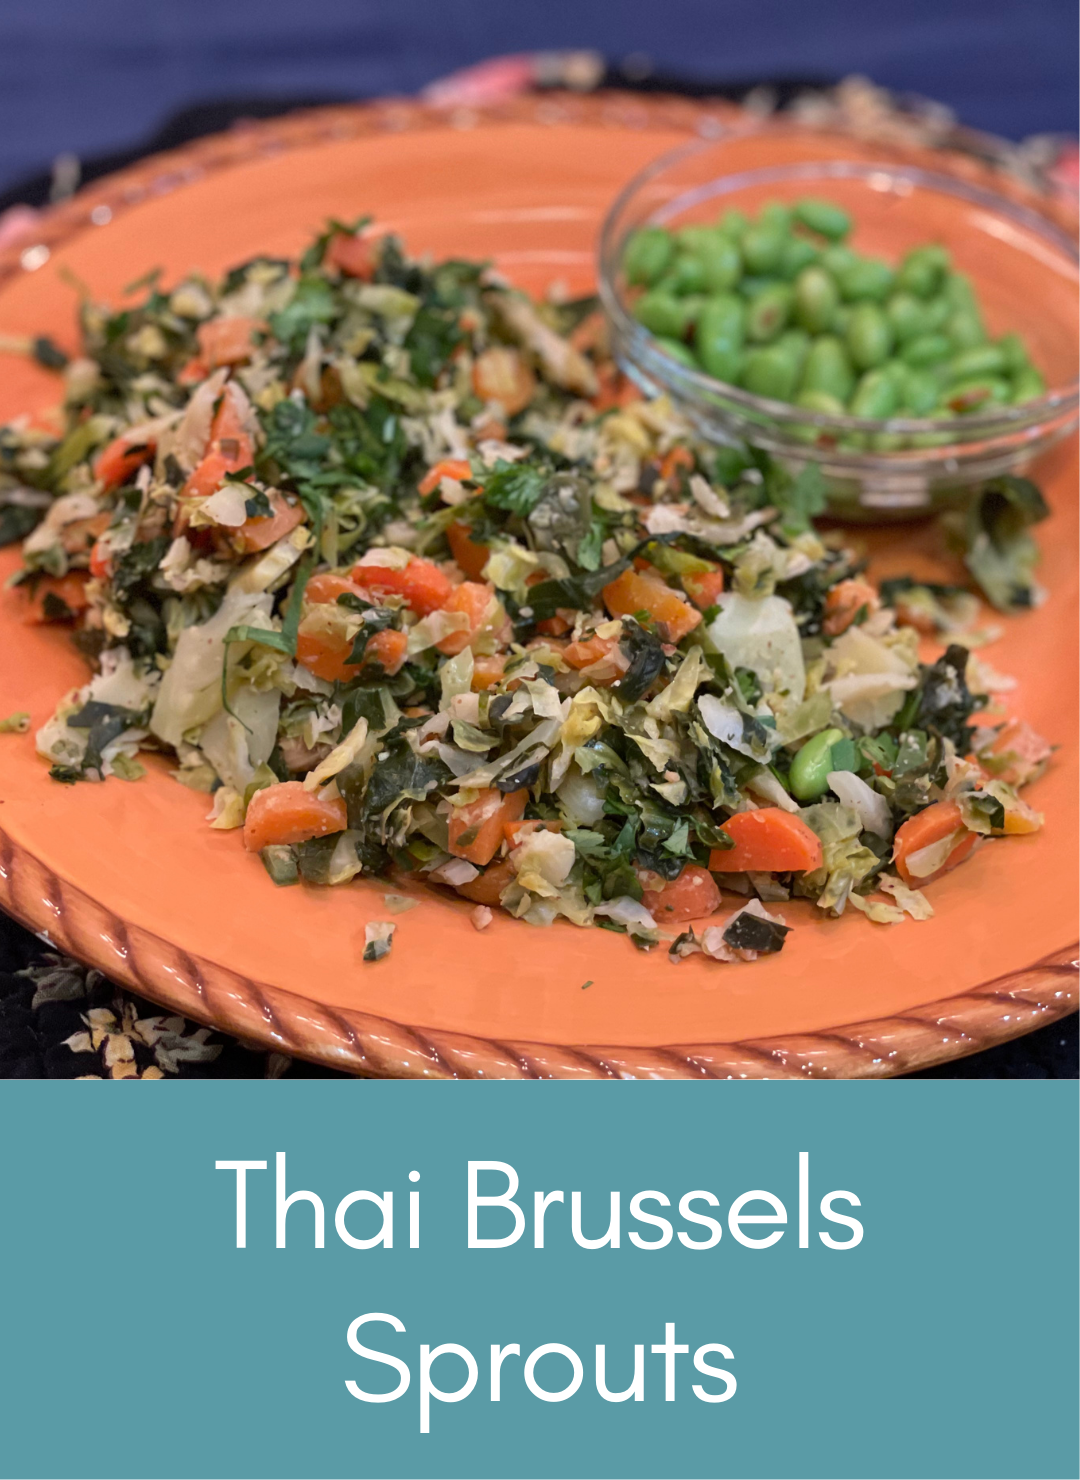 Vegan Thai Brussels sprouts Picture with link to recipe